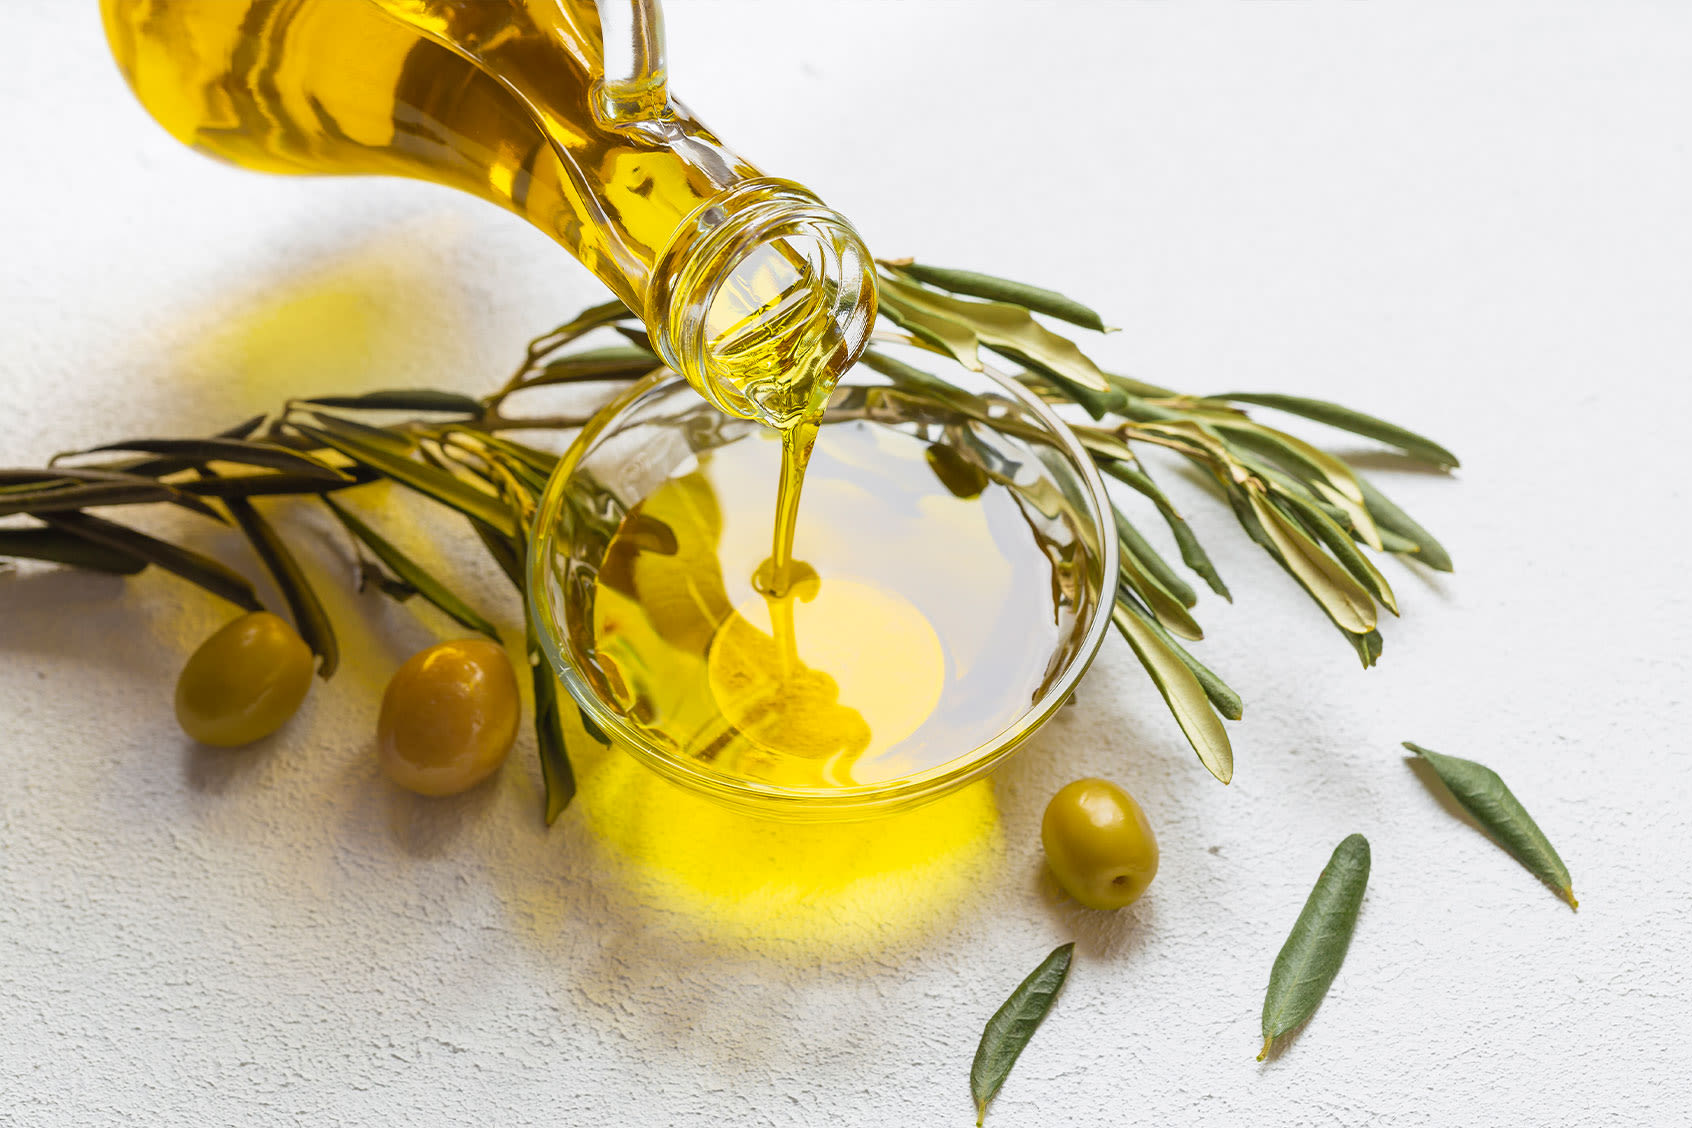 Experts predicted olive oil prices would skyrocket due to scorching temperatures. They were right